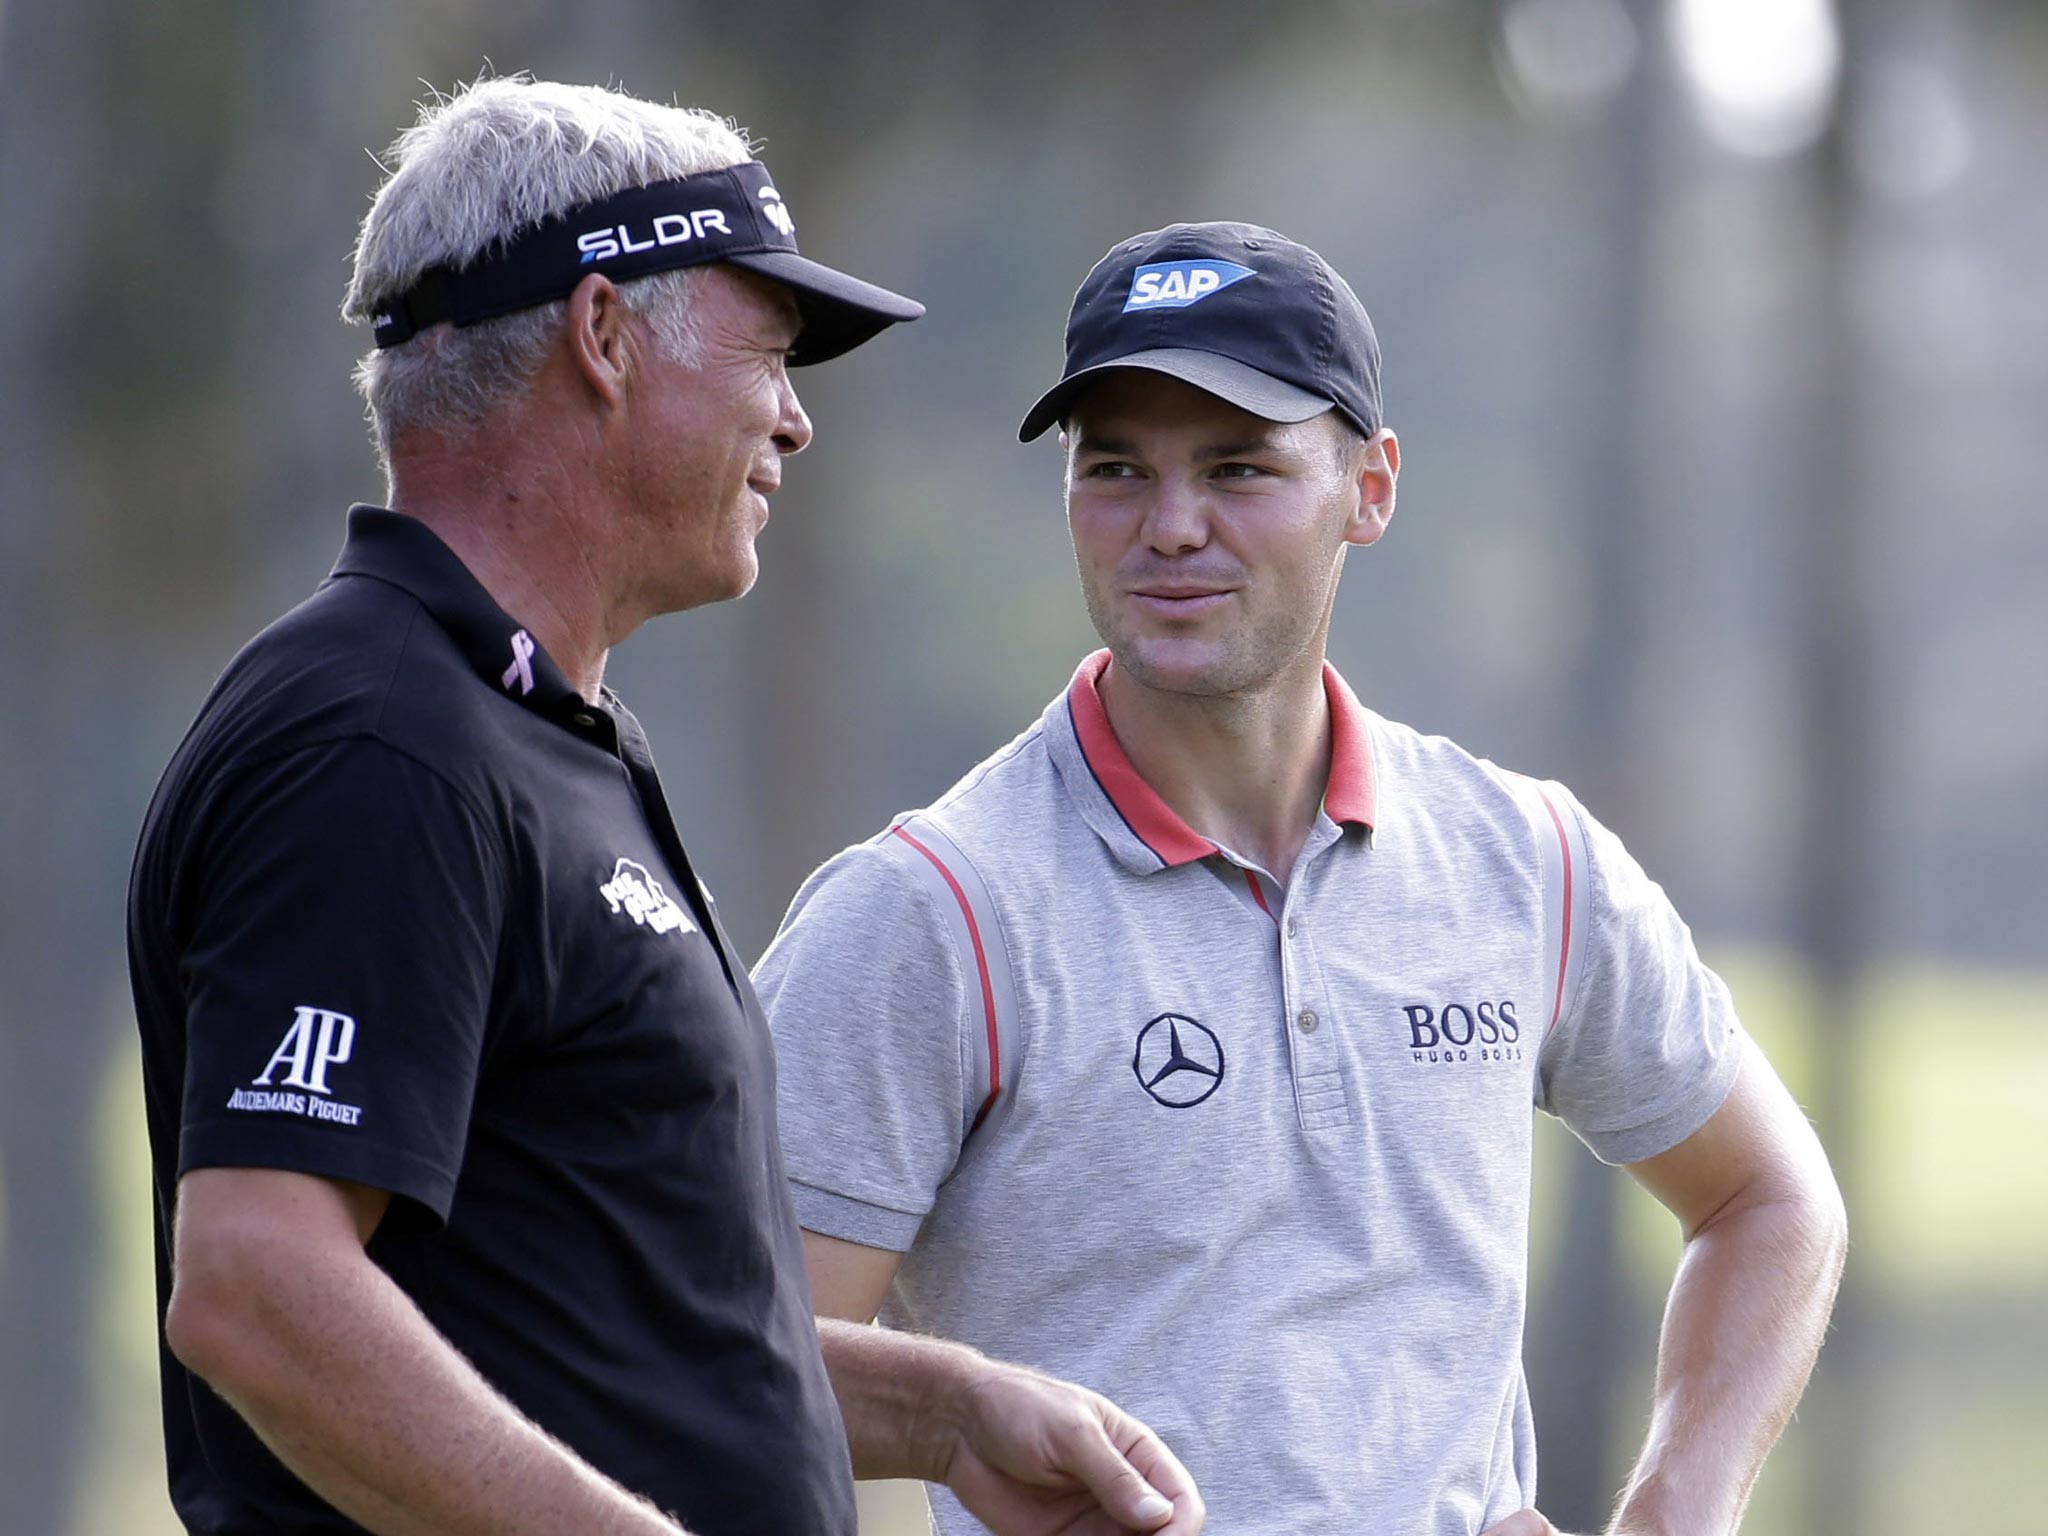 Martin Kaymer (right) hit a second round 69 after a course record equalling 63 in his first to put him 12 under